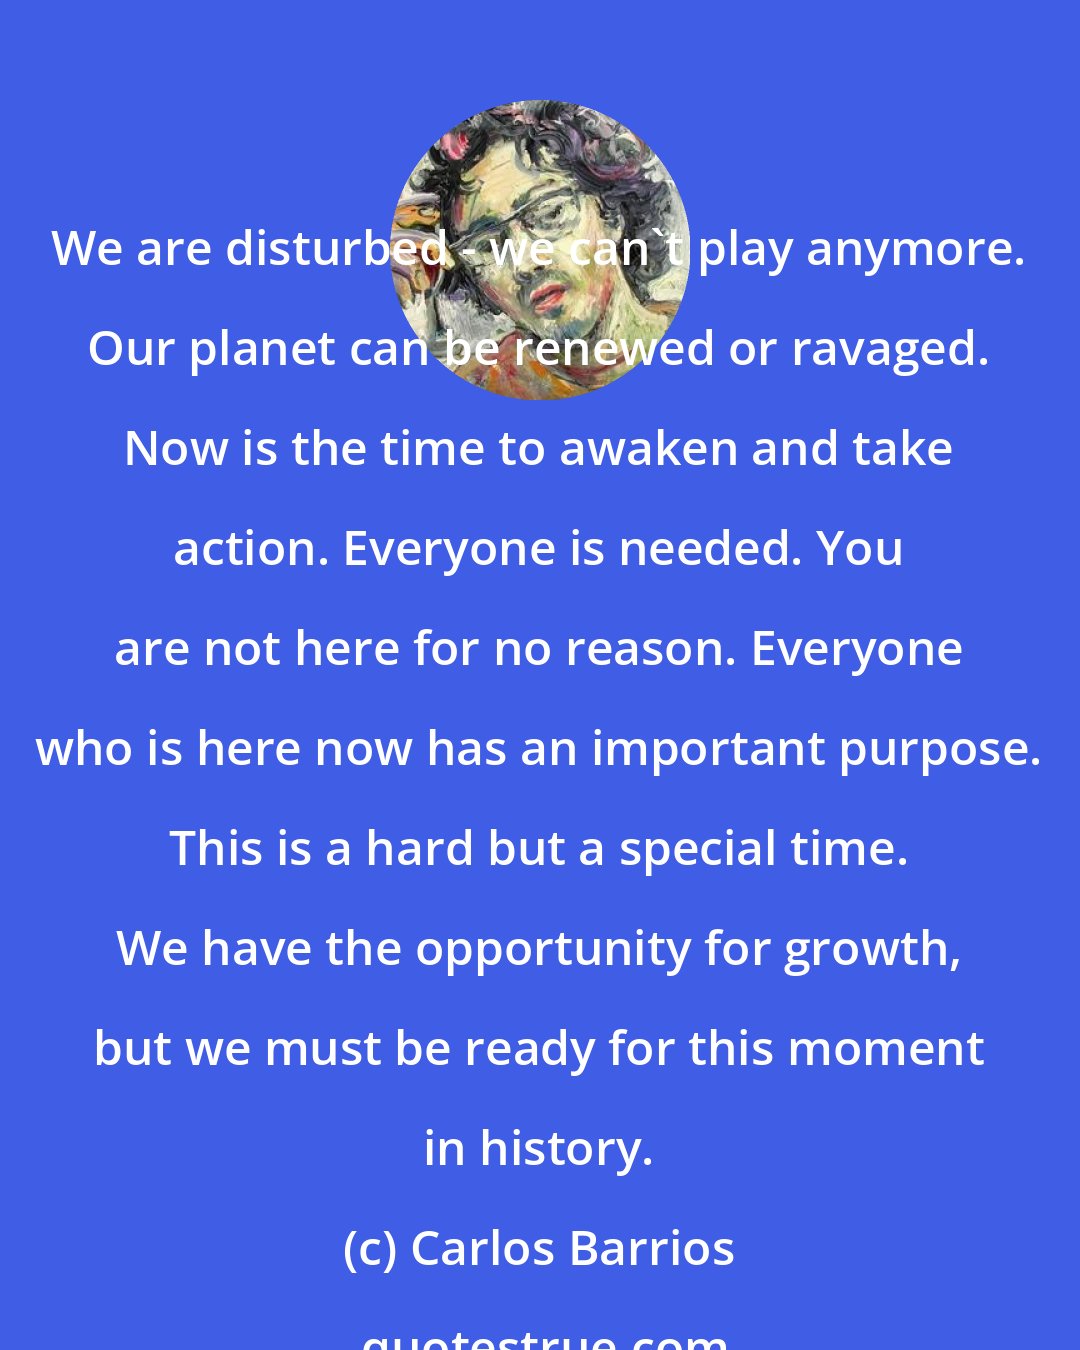 Carlos Barrios: We are disturbed - we can't play anymore. Our planet can be renewed or ravaged. Now is the time to awaken and take action. Everyone is needed. You are not here for no reason. Everyone who is here now has an important purpose. This is a hard but a special time. We have the opportunity for growth, but we must be ready for this moment in history.